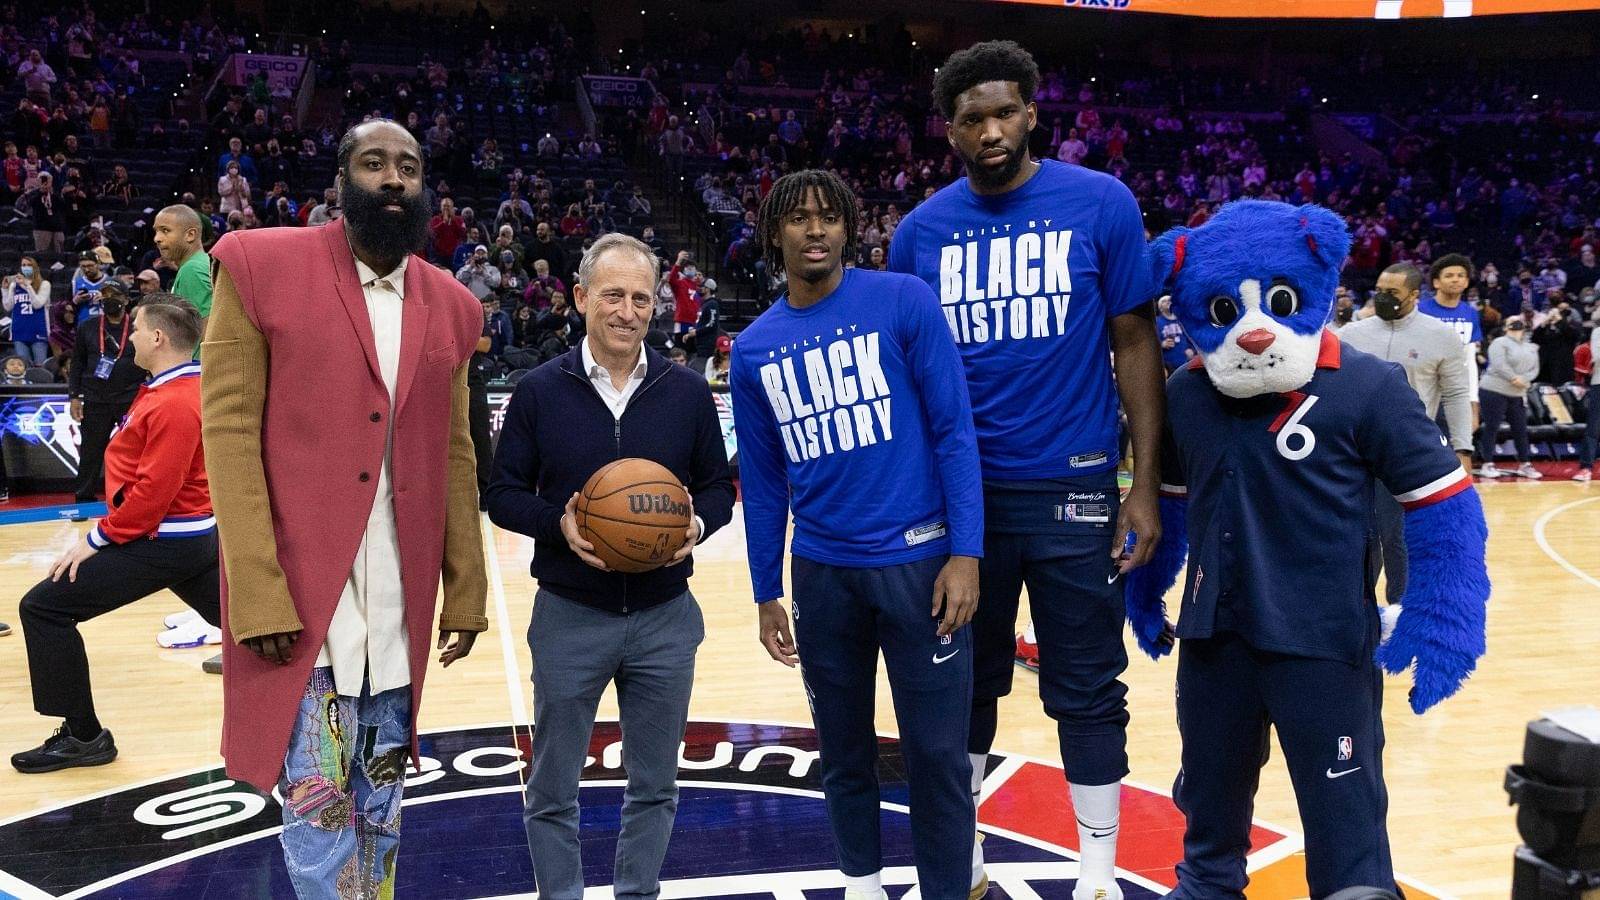 "Joel Embiid, James Harden and Tyrese Maxey almost broke Wilt Chamberlain and Co's record": Sixers trio score 176 points in their first 2 outings coming close to a record set in 1961